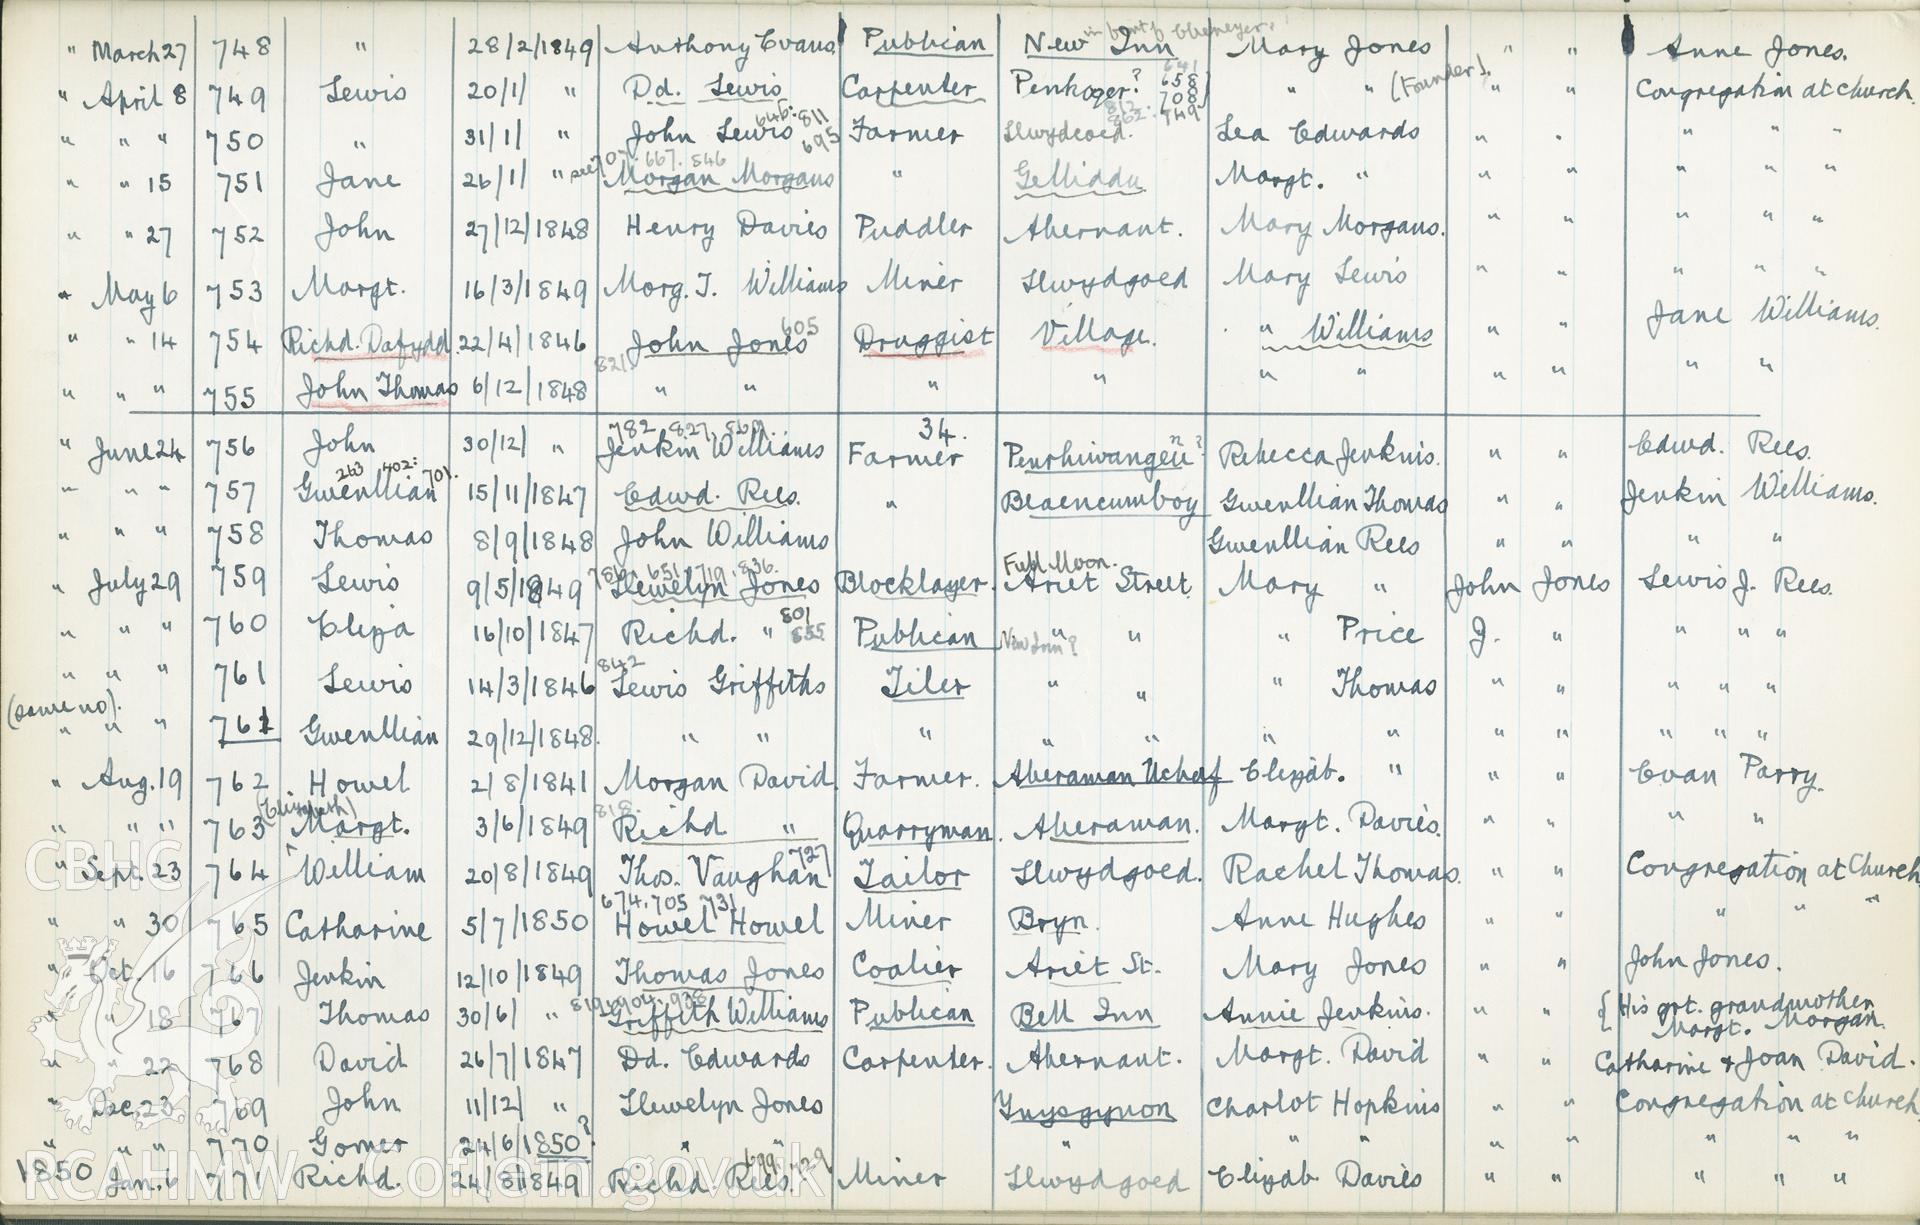 "Baptism Registered" book for Hen Dy Cwrdd, made between April 19th and 28th, 1941, by W. W. Price. Page listing baptisms from 27th March 1849 to 6th January 1850. Donated to the RCAHMW as part of the Digital Dissent Project.